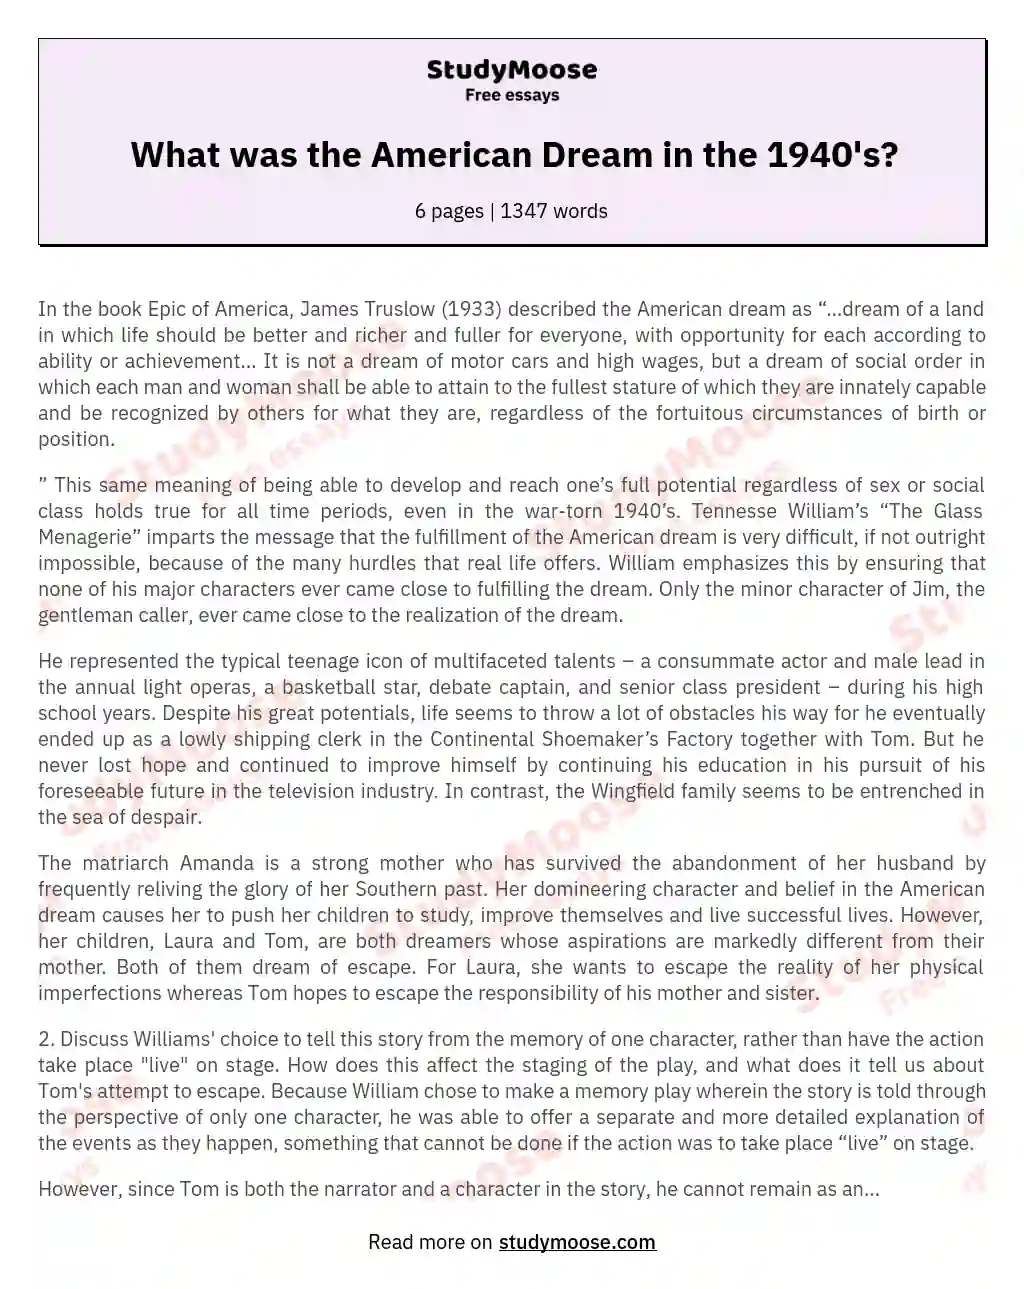 What was the American Dream in the 1940's?